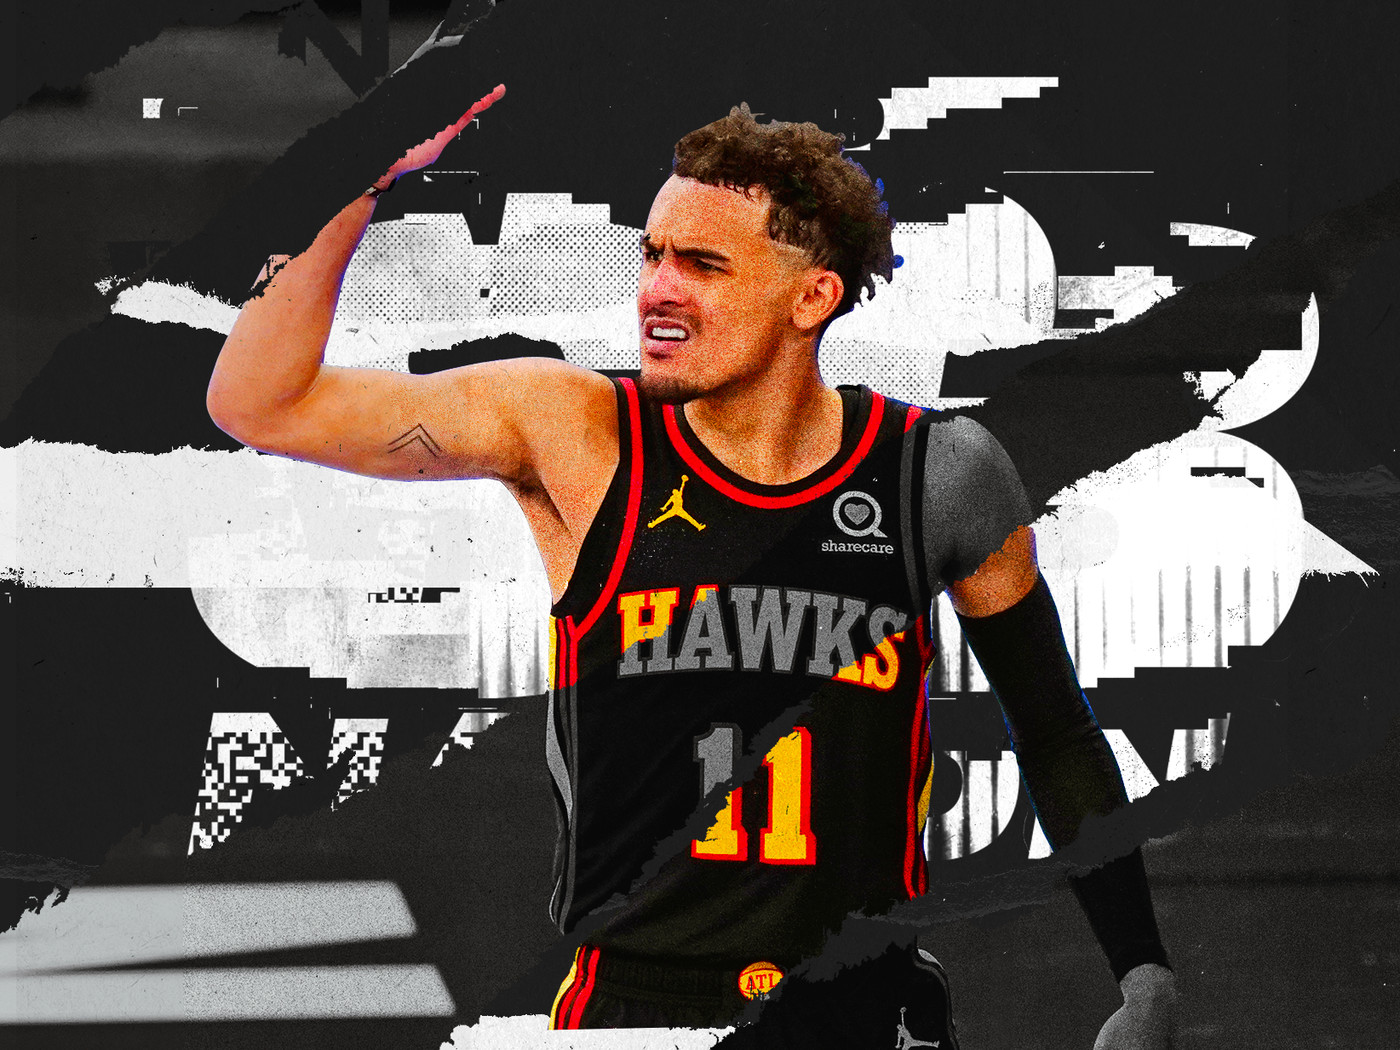 wallpaper trae young bow